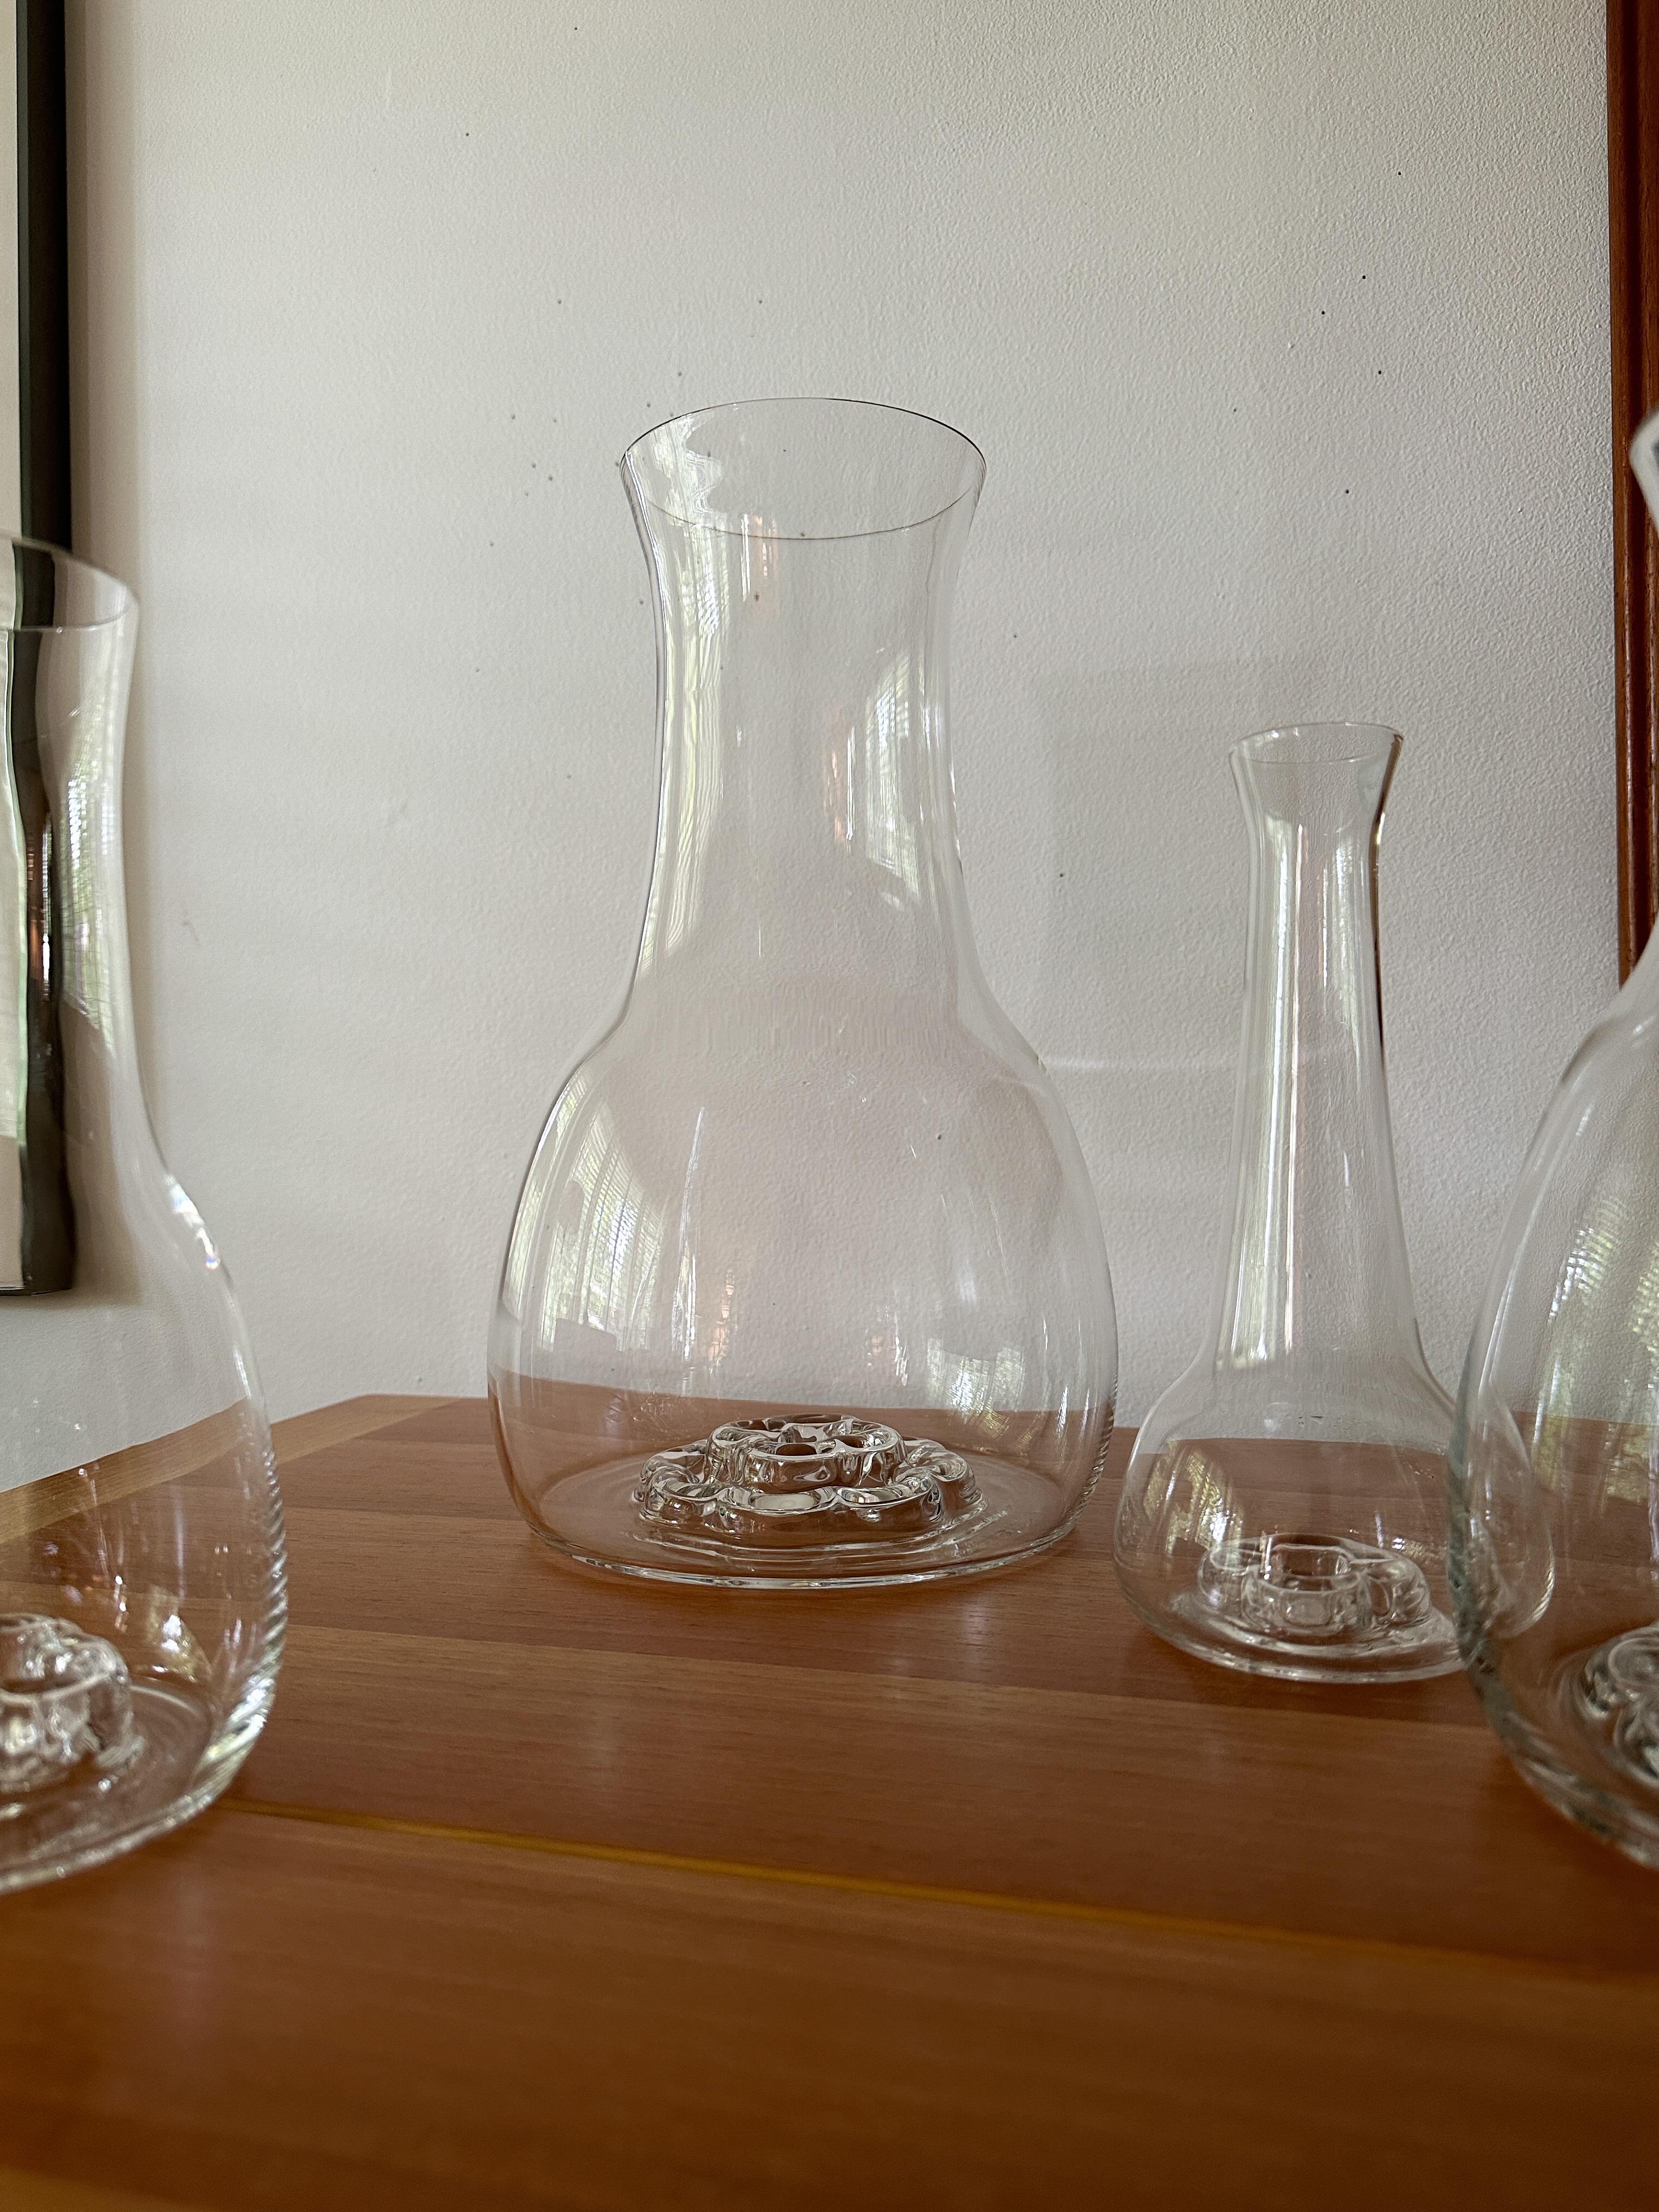 Six Clear Olle Alberius Designed Vases From Orrefors In Good Condition For Sale In Doraville, GA